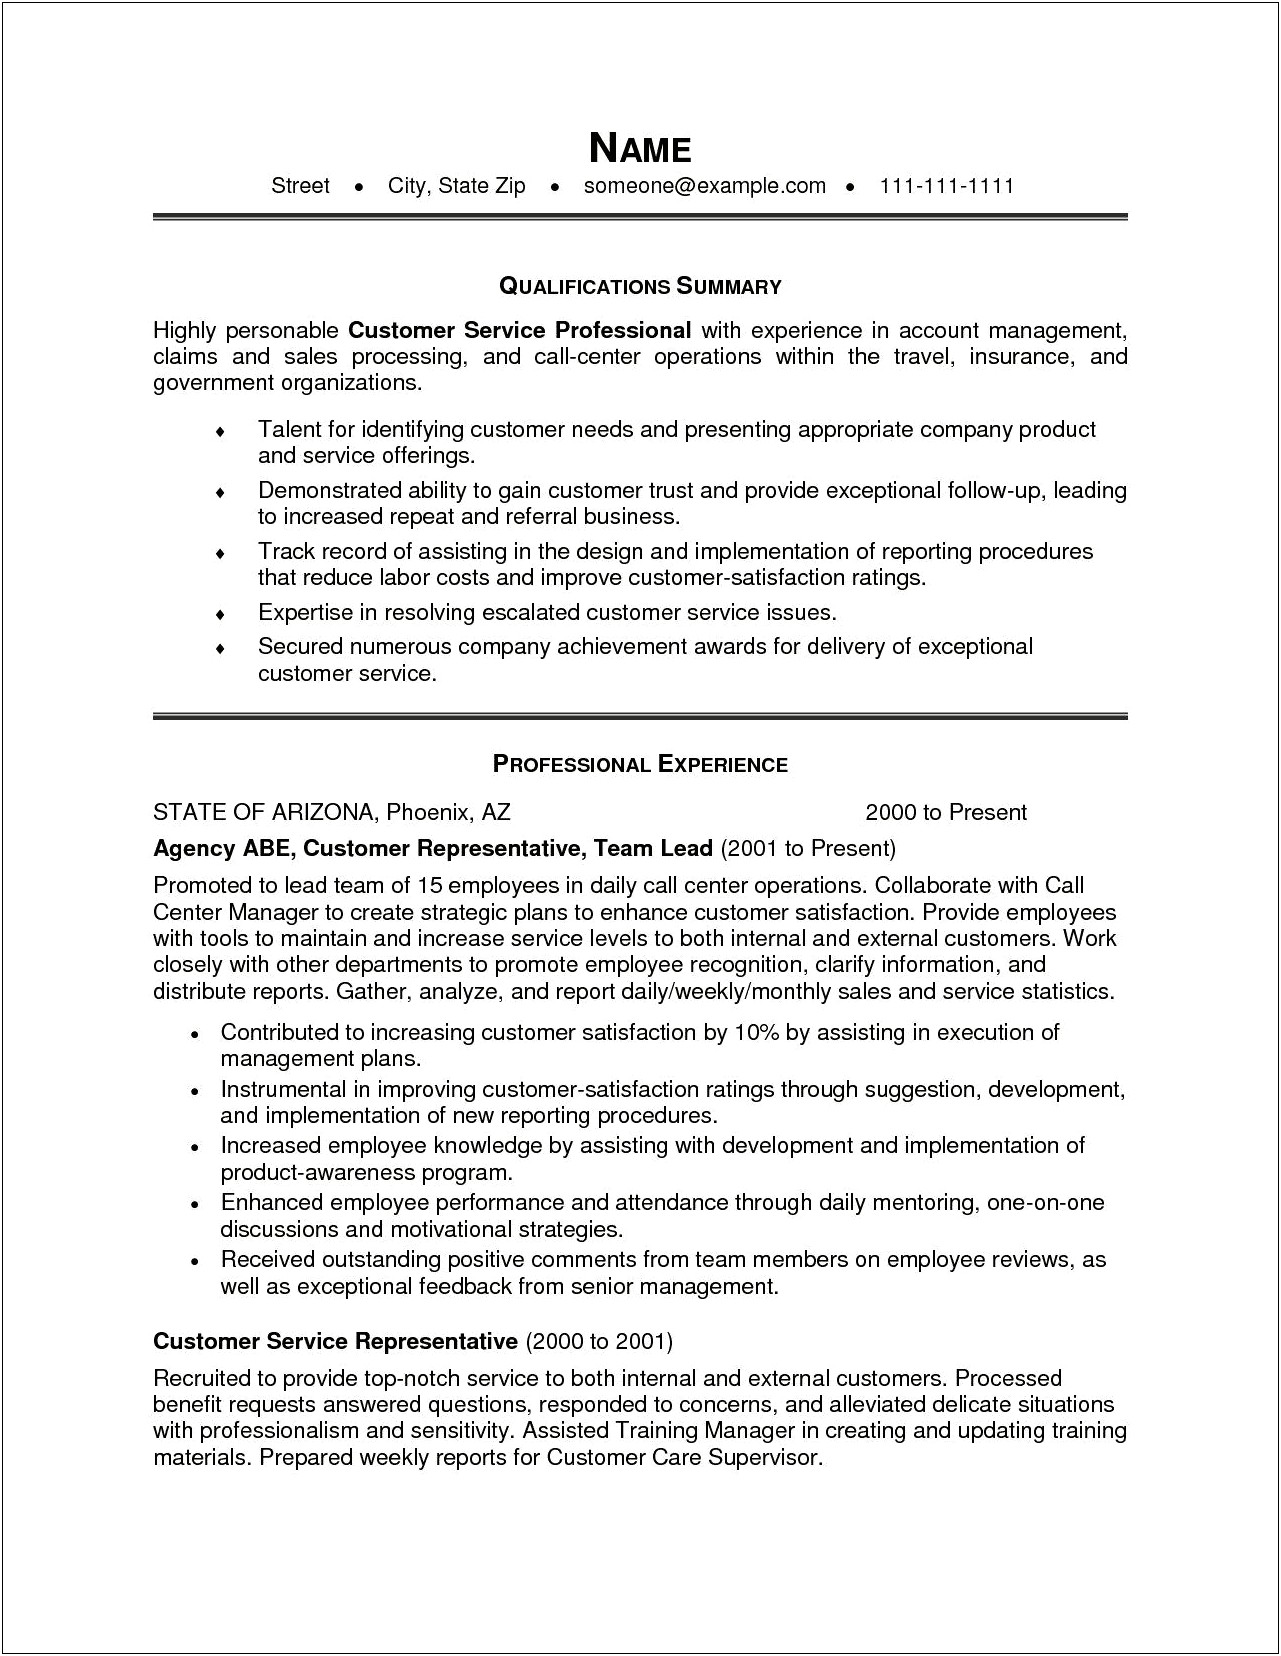 General Summary For Resume Customer Service